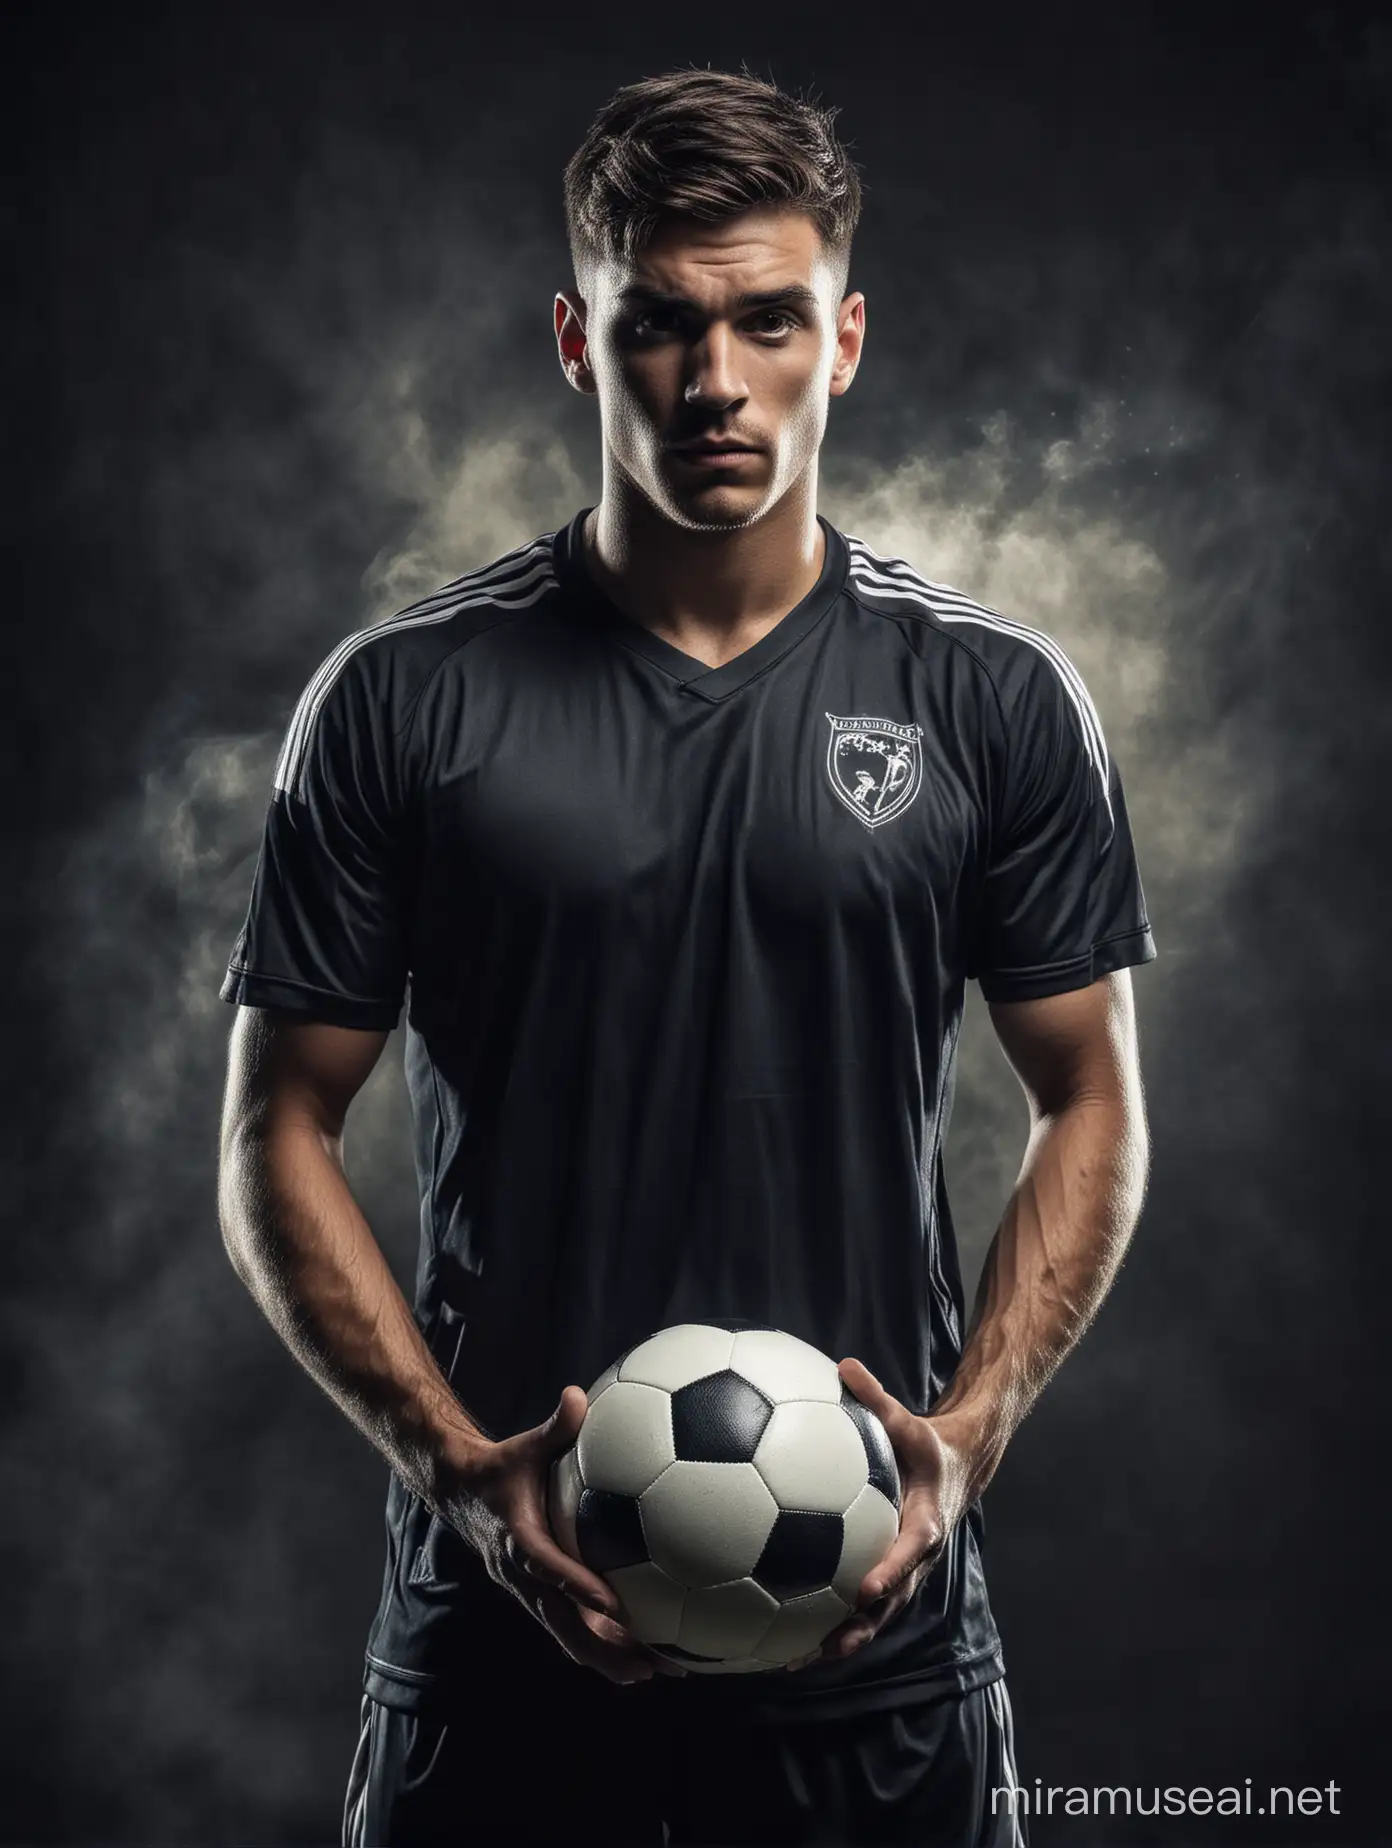 Male Soccer Player Holding Football on Dramatic Background